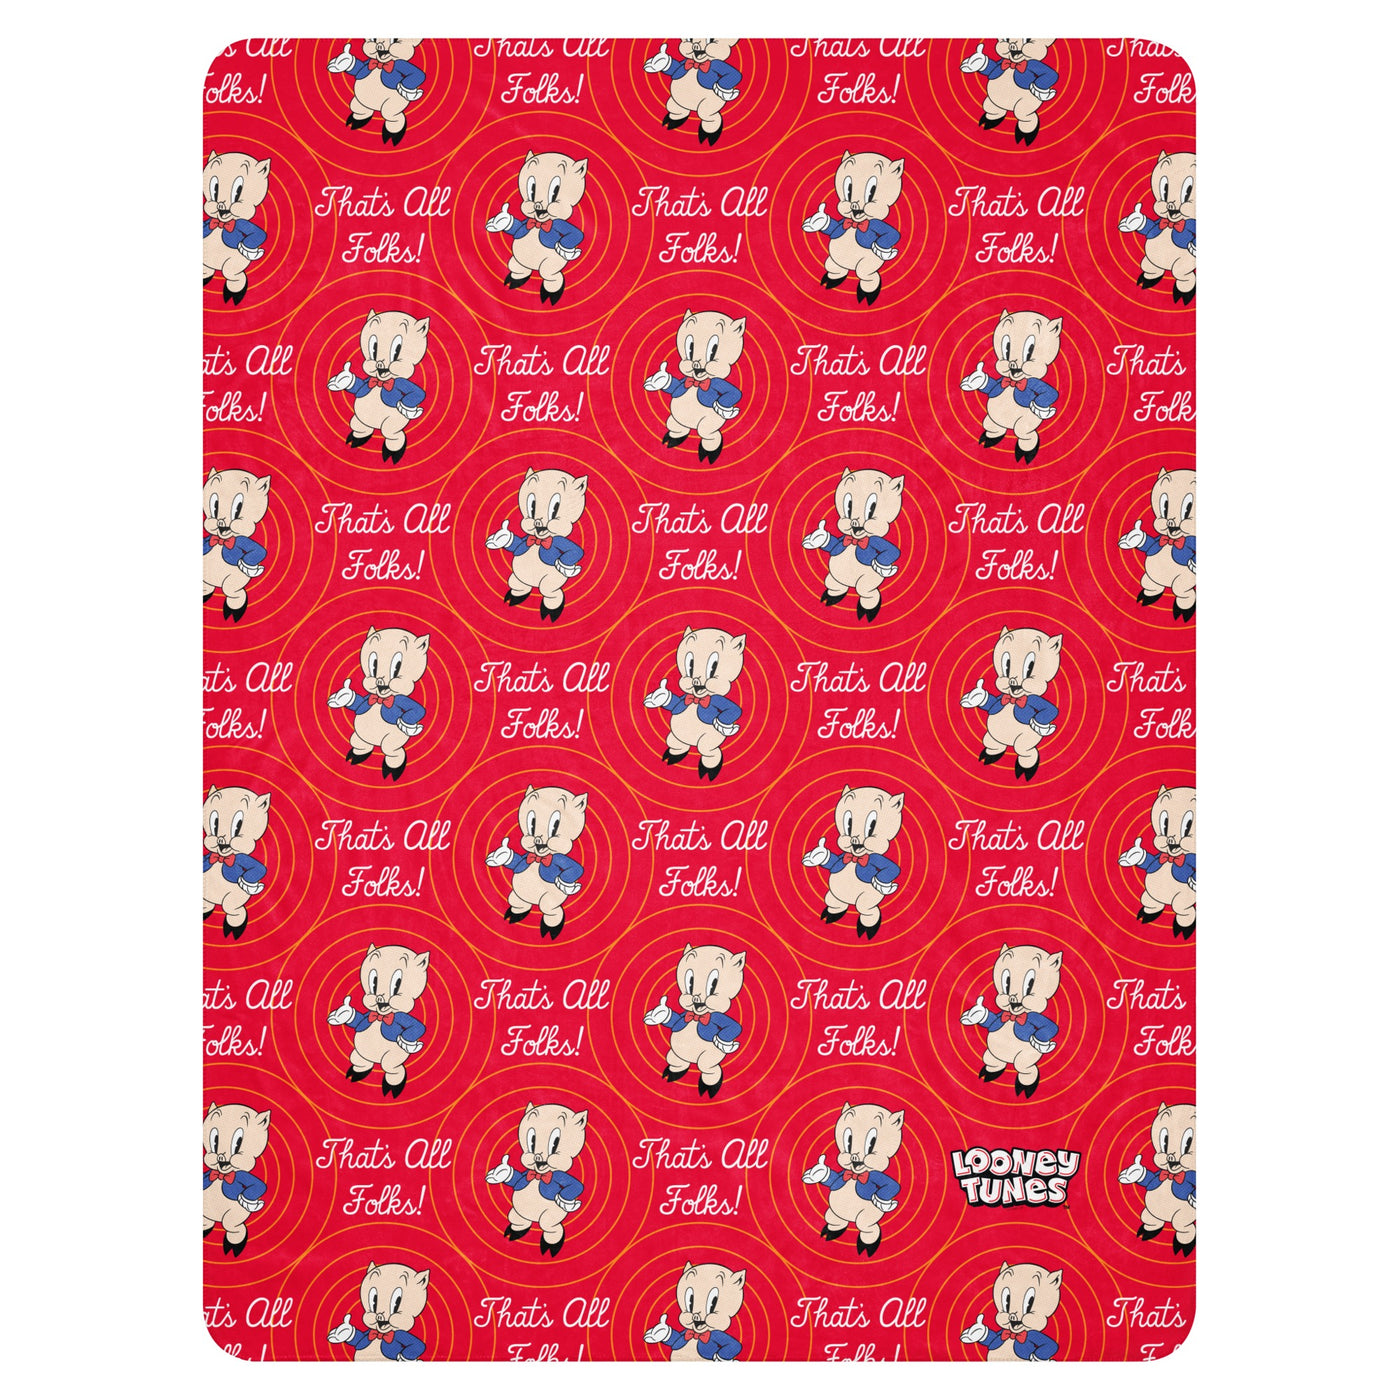 Looney Tunes That's All Folks! Porky Pig Sherpa Blanket